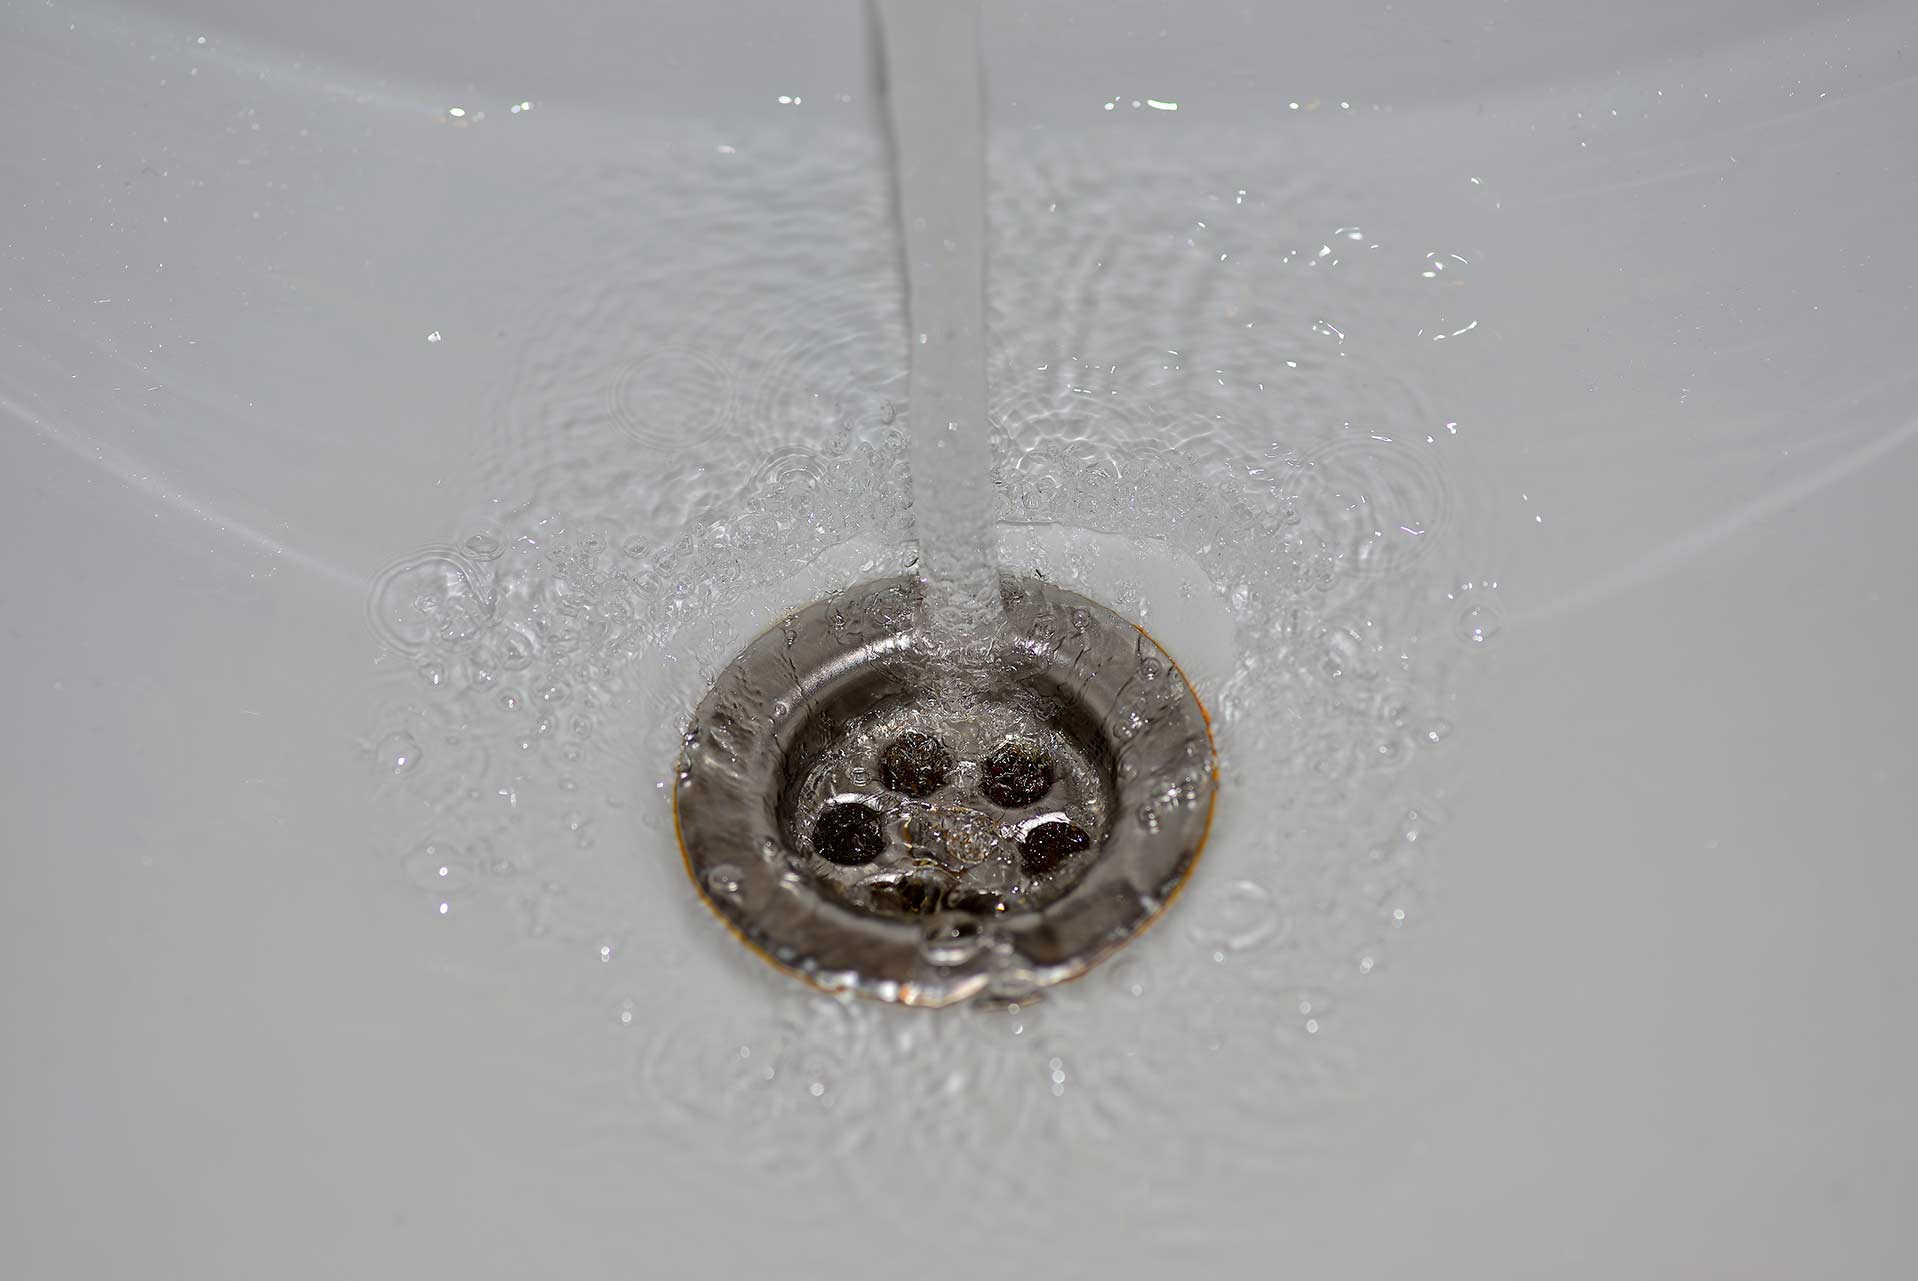 A2B Drains provides services to unblock blocked sinks and drains for properties in Arbroath.